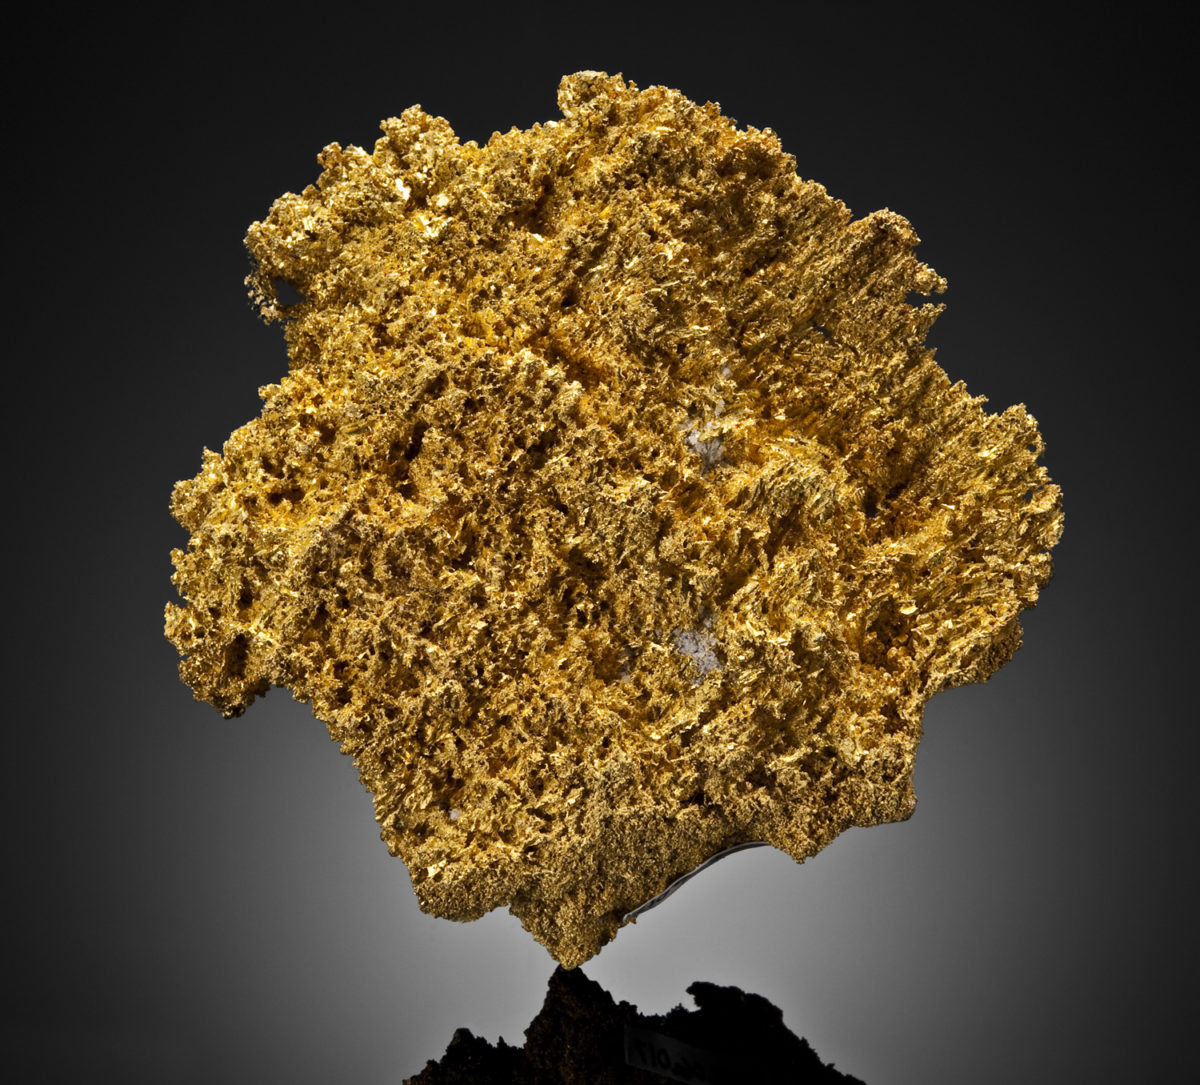 Gold; 9.5 cm tall, from the Little Jonny (Ibex) Mine, Leadville, Lake County, Colorado, USA, in the National Mining Hall of Fame Museum collection. Photo credit: Mark Mauthner.